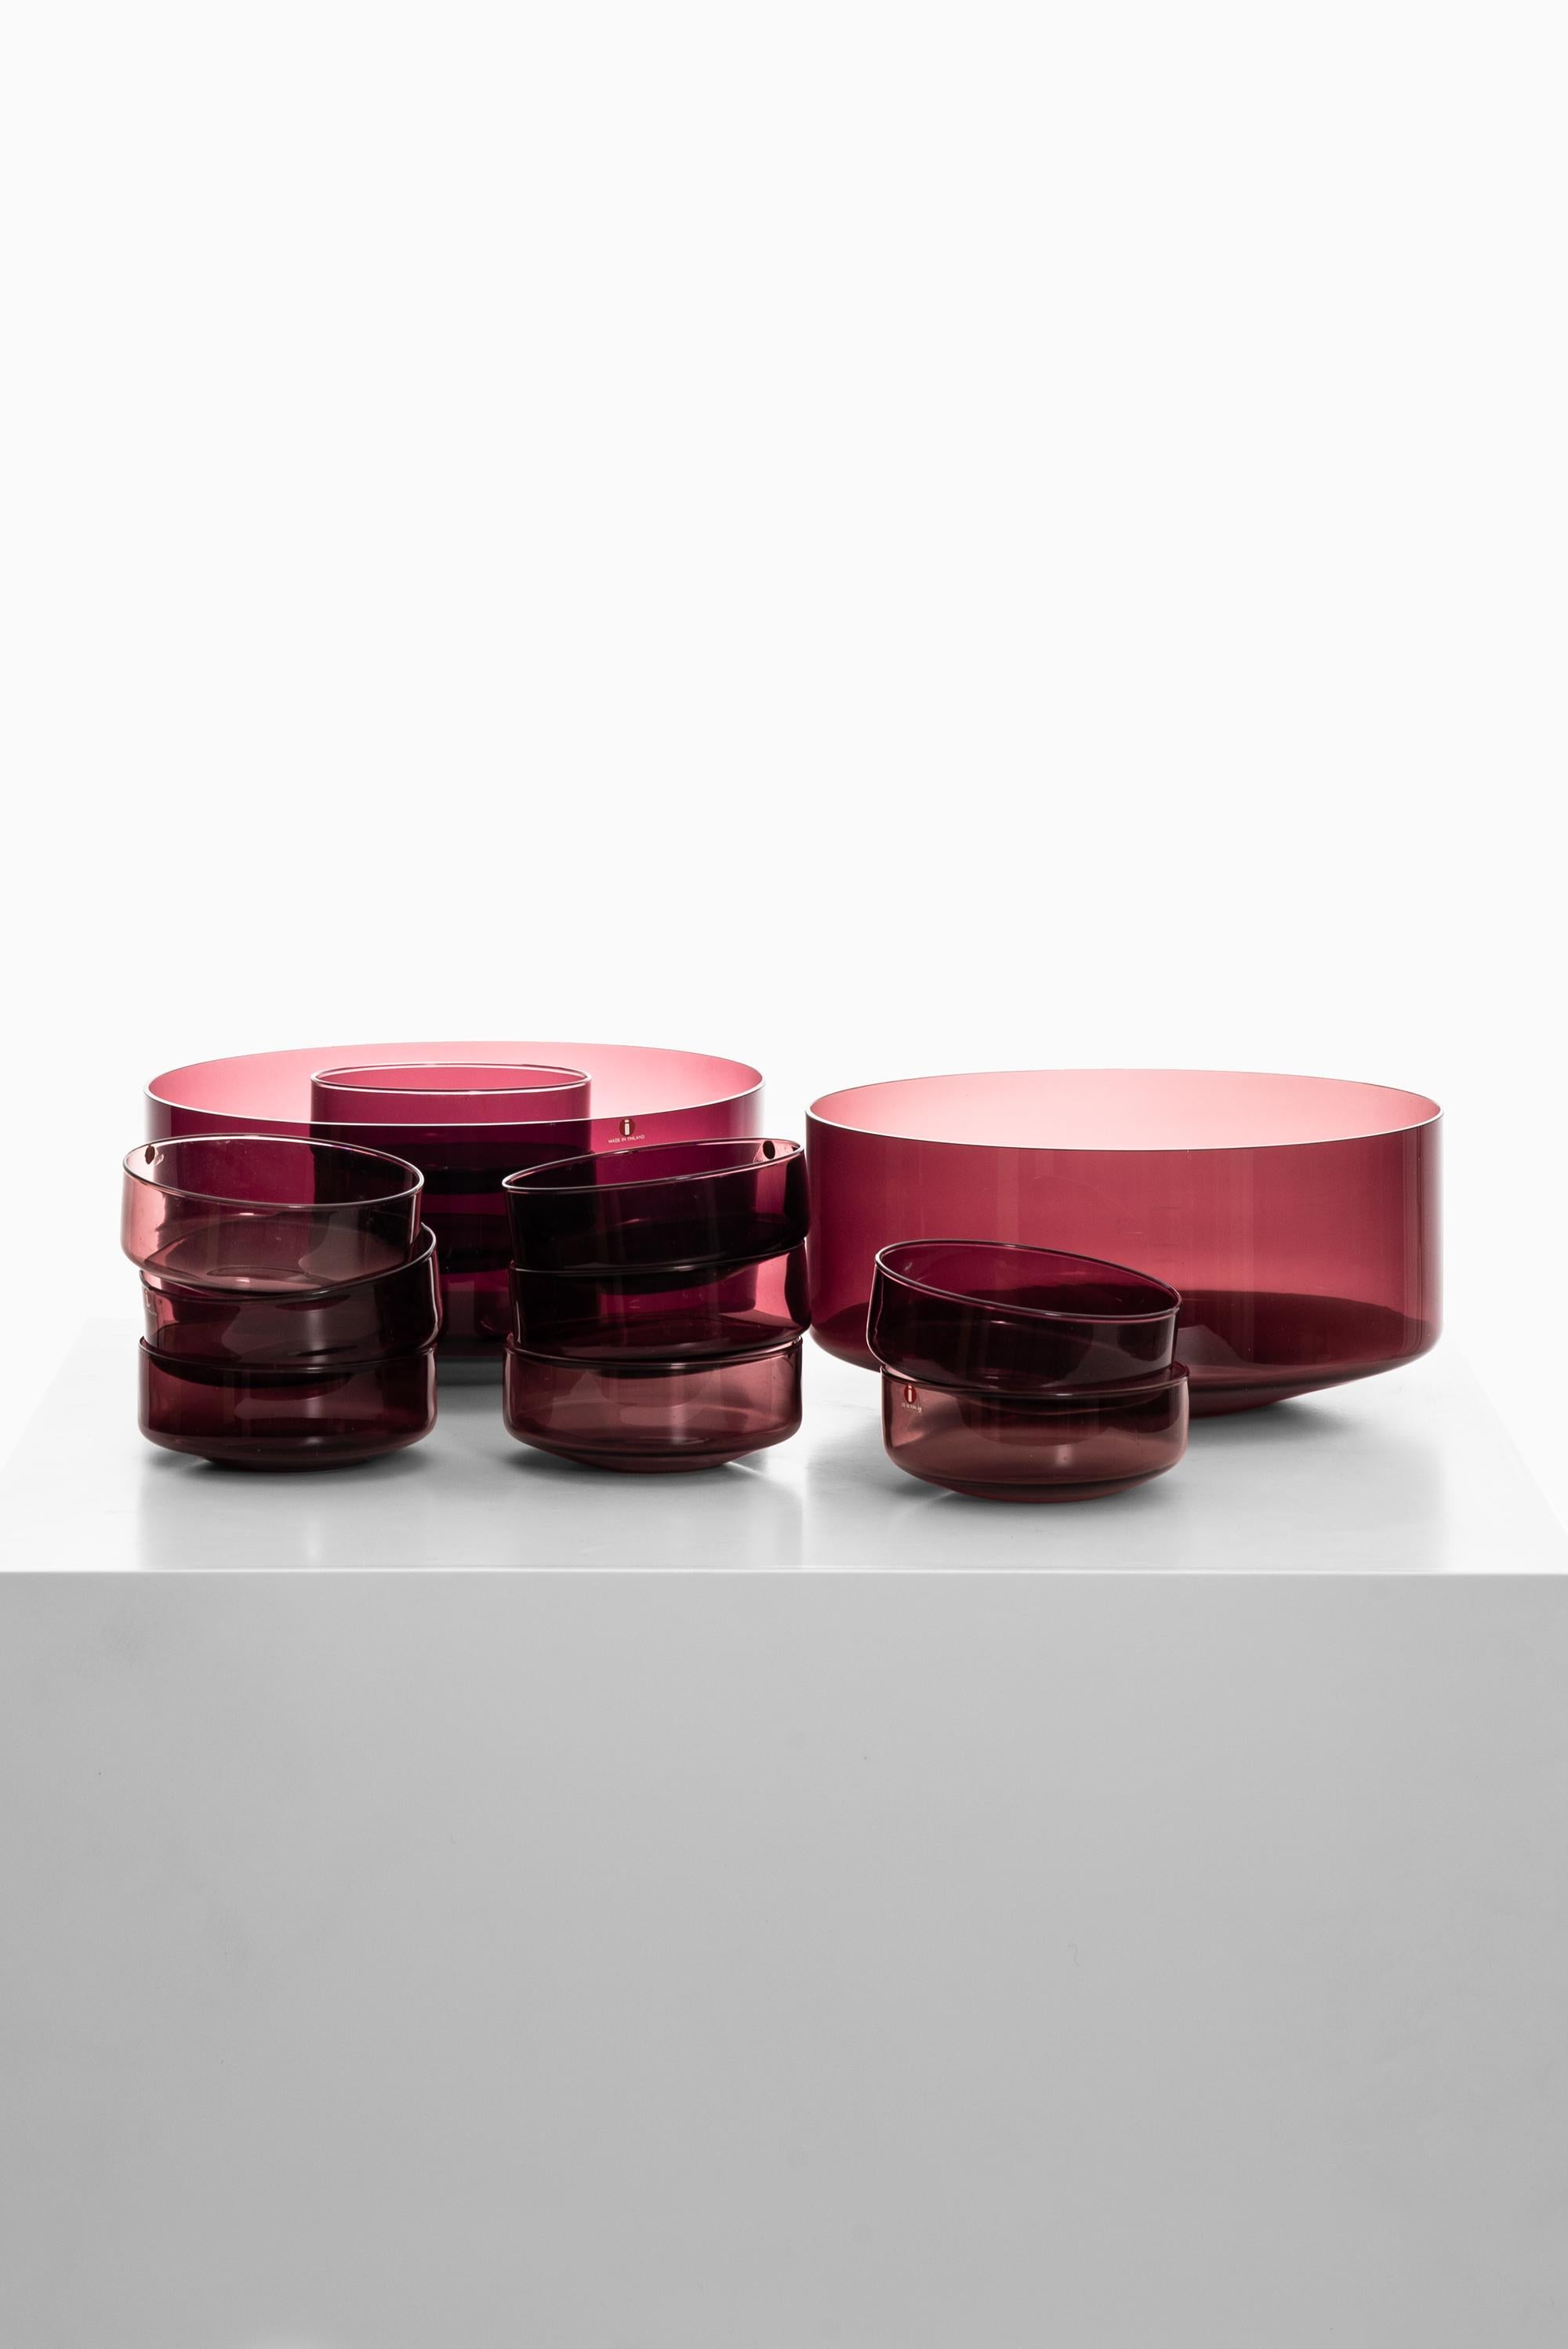 A set of 11 small and 2 big glass bowls designed by Timo Sarpaneva. Produced by Iittala in Finland.